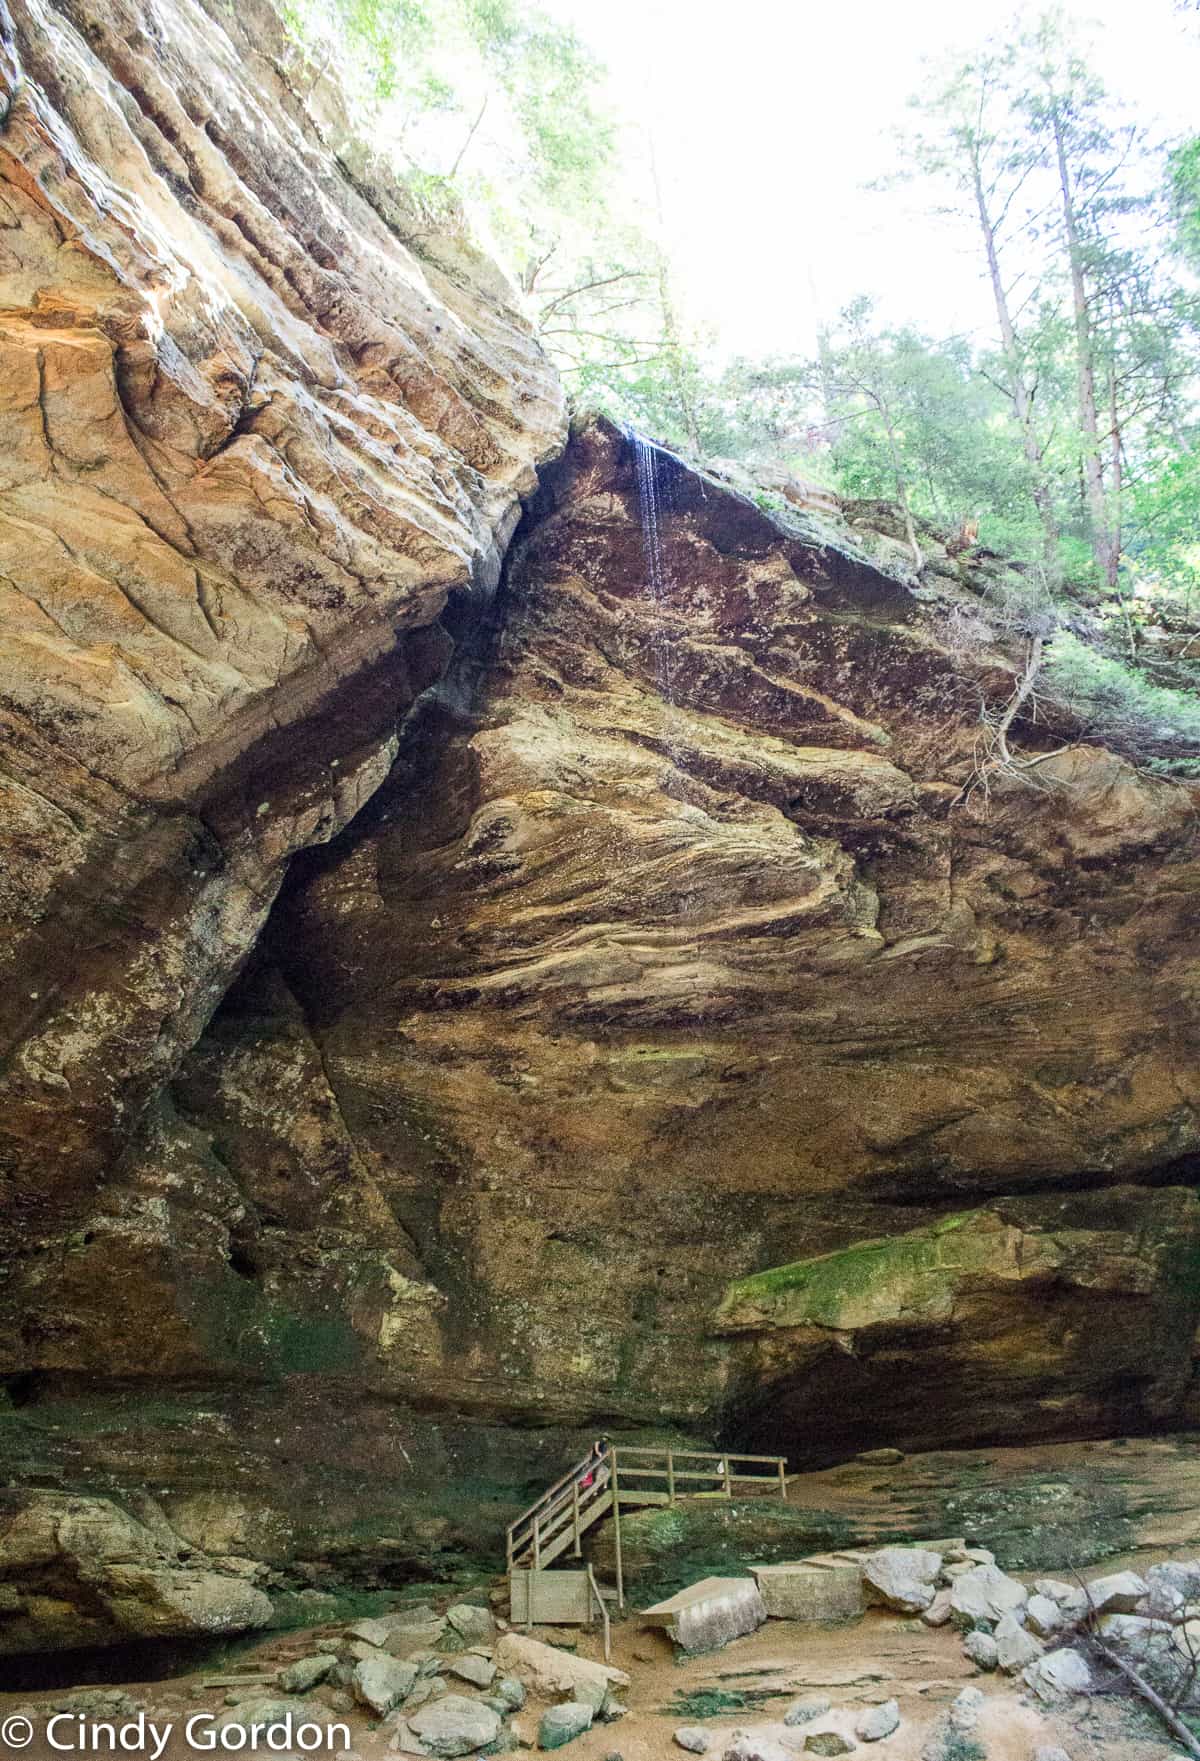 10 places to visit in hocking hills